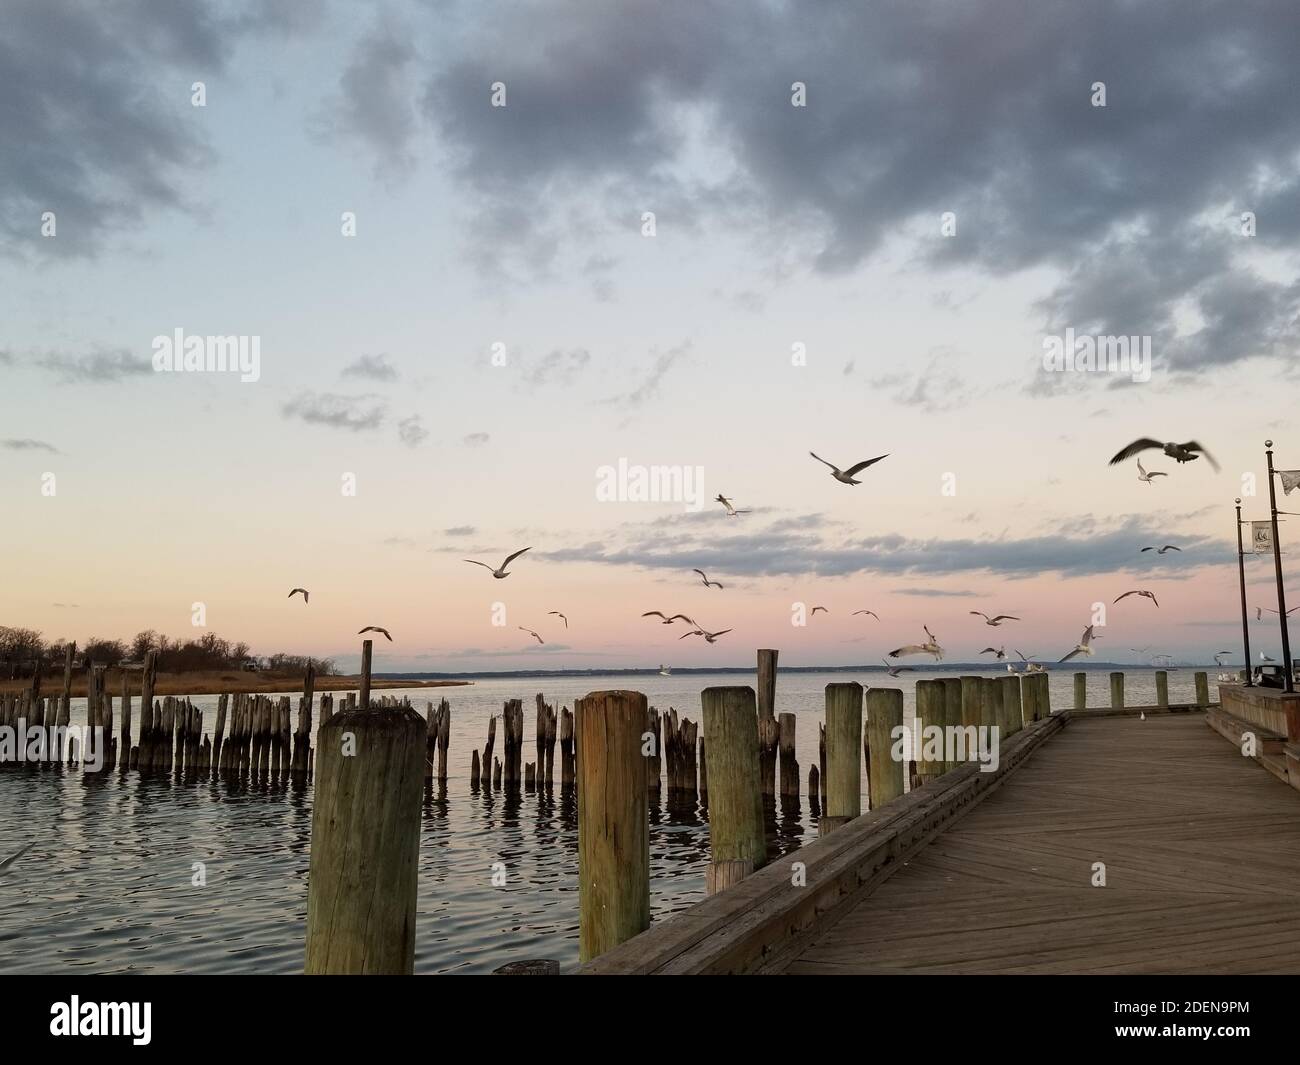 Group of seagulls in a frenzy and jockeying for position on the wooden pilings of a marina -07 Stock Photo